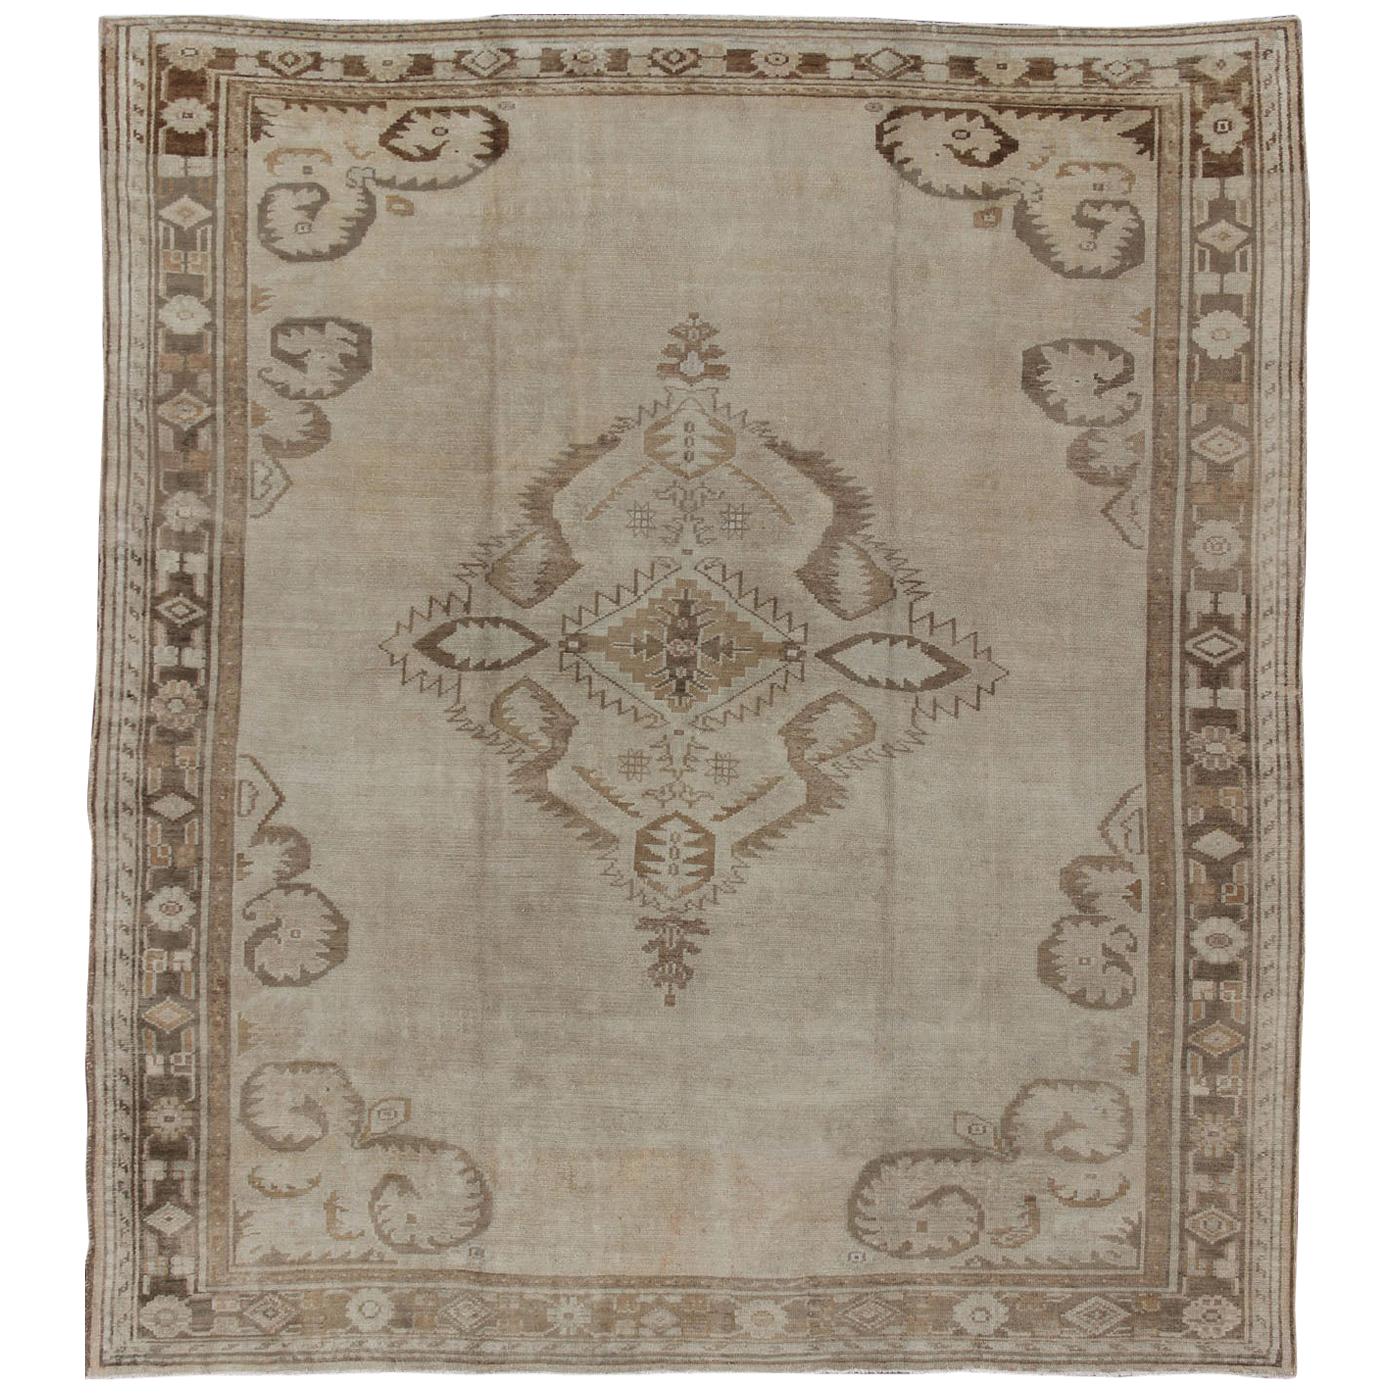 Large Square Size Vintage Turkish Oushak Rug in Earthy Tones With Medallion For Sale